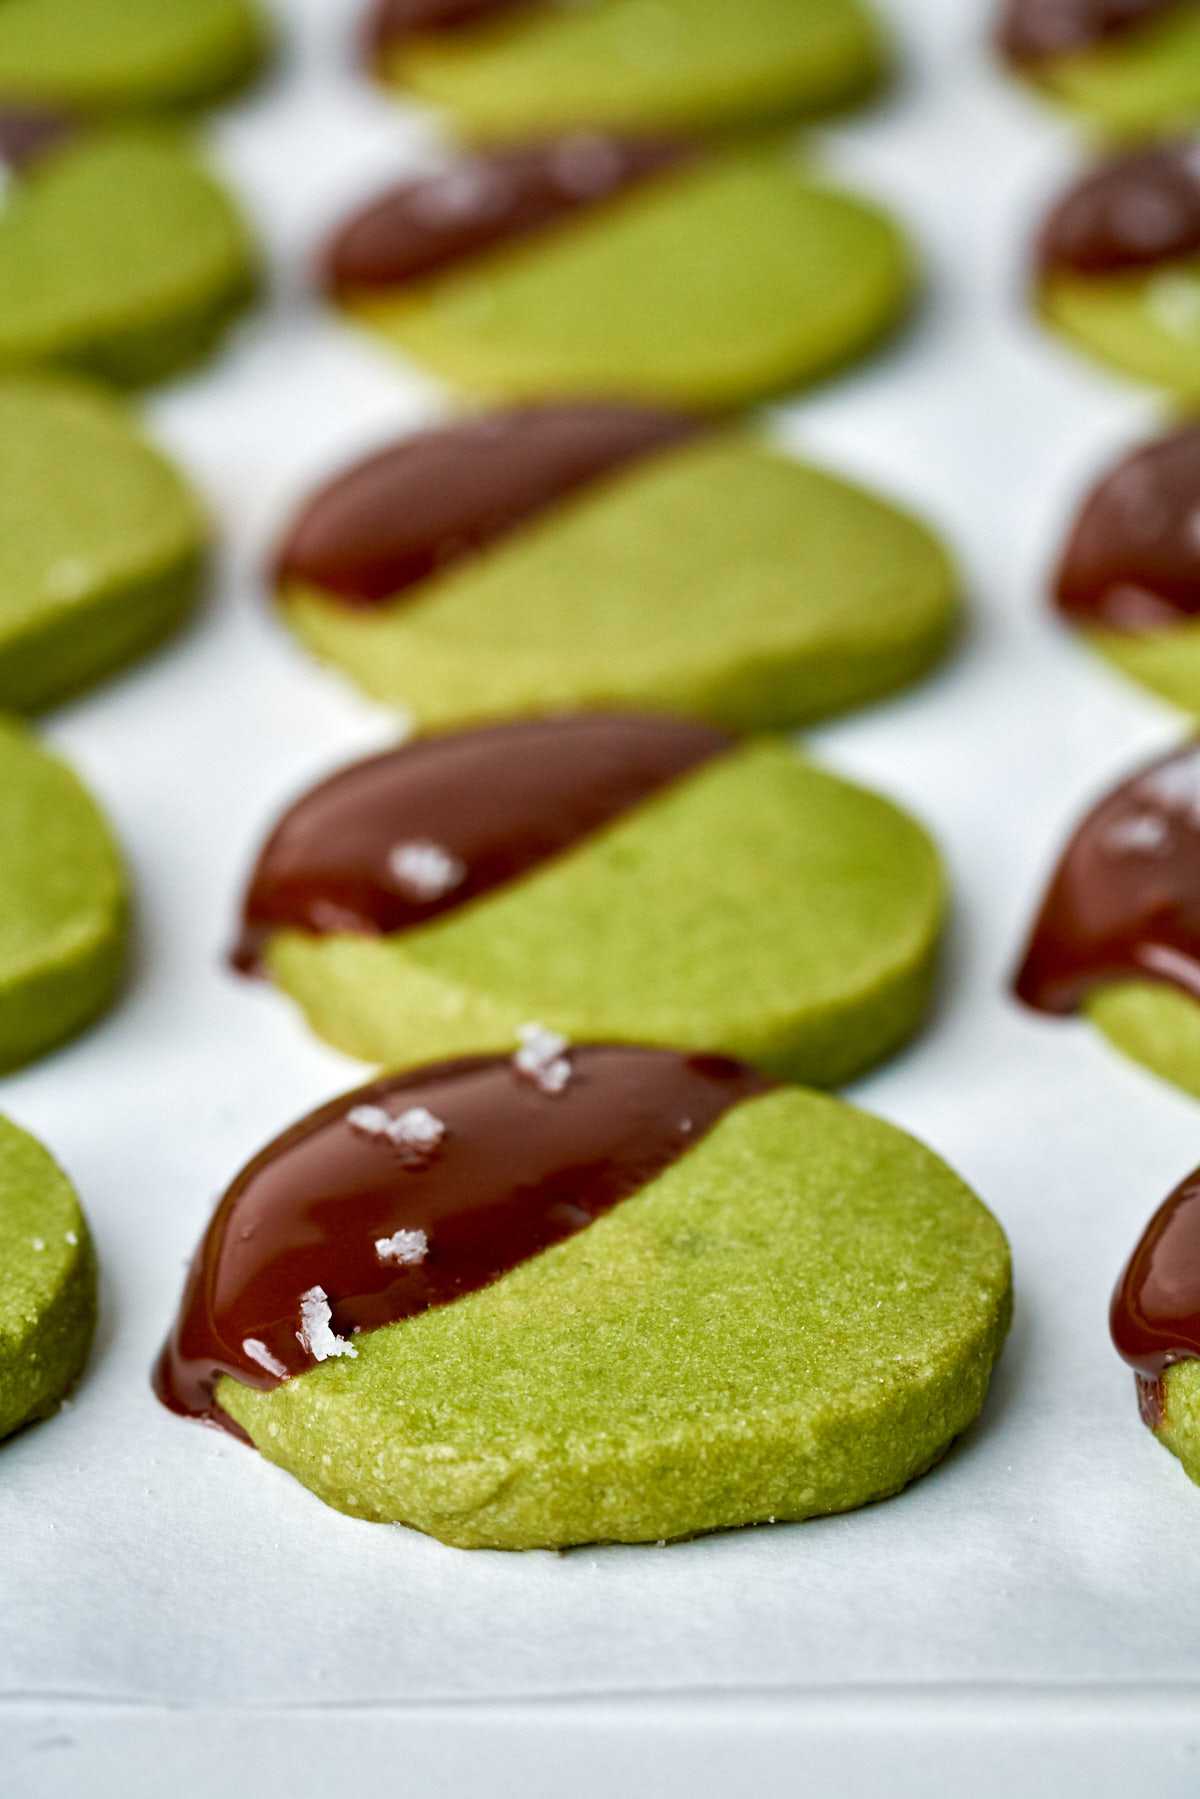 Green cookies dipped in chocolate with sea salt.